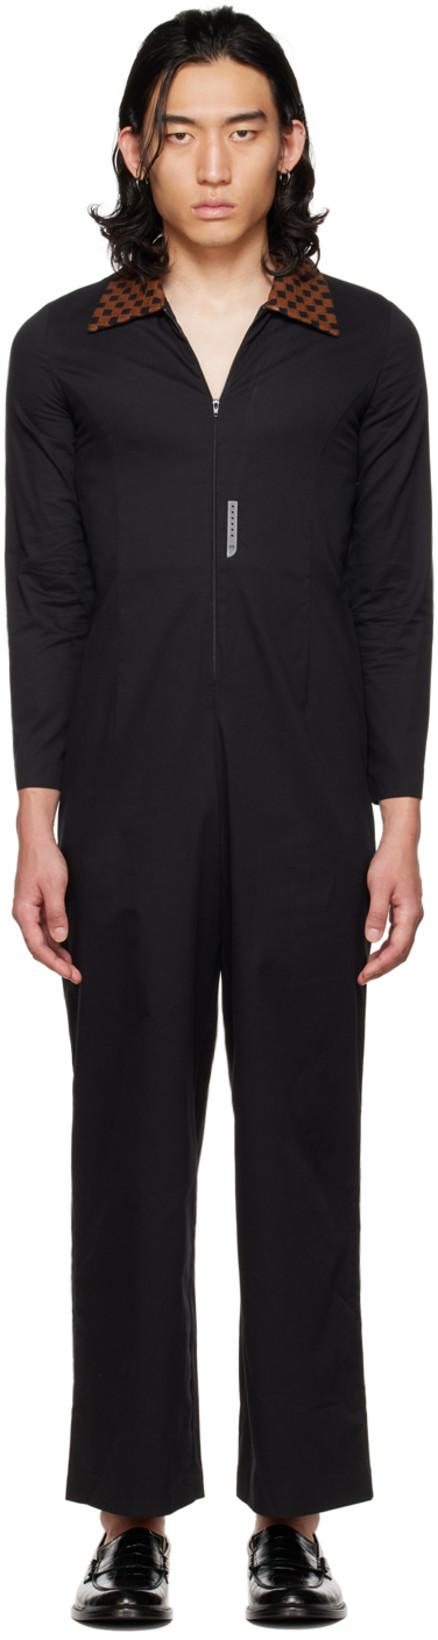 Black Chess Collar Embroidered Jumpsuit by CONNOR MC KNIGHT